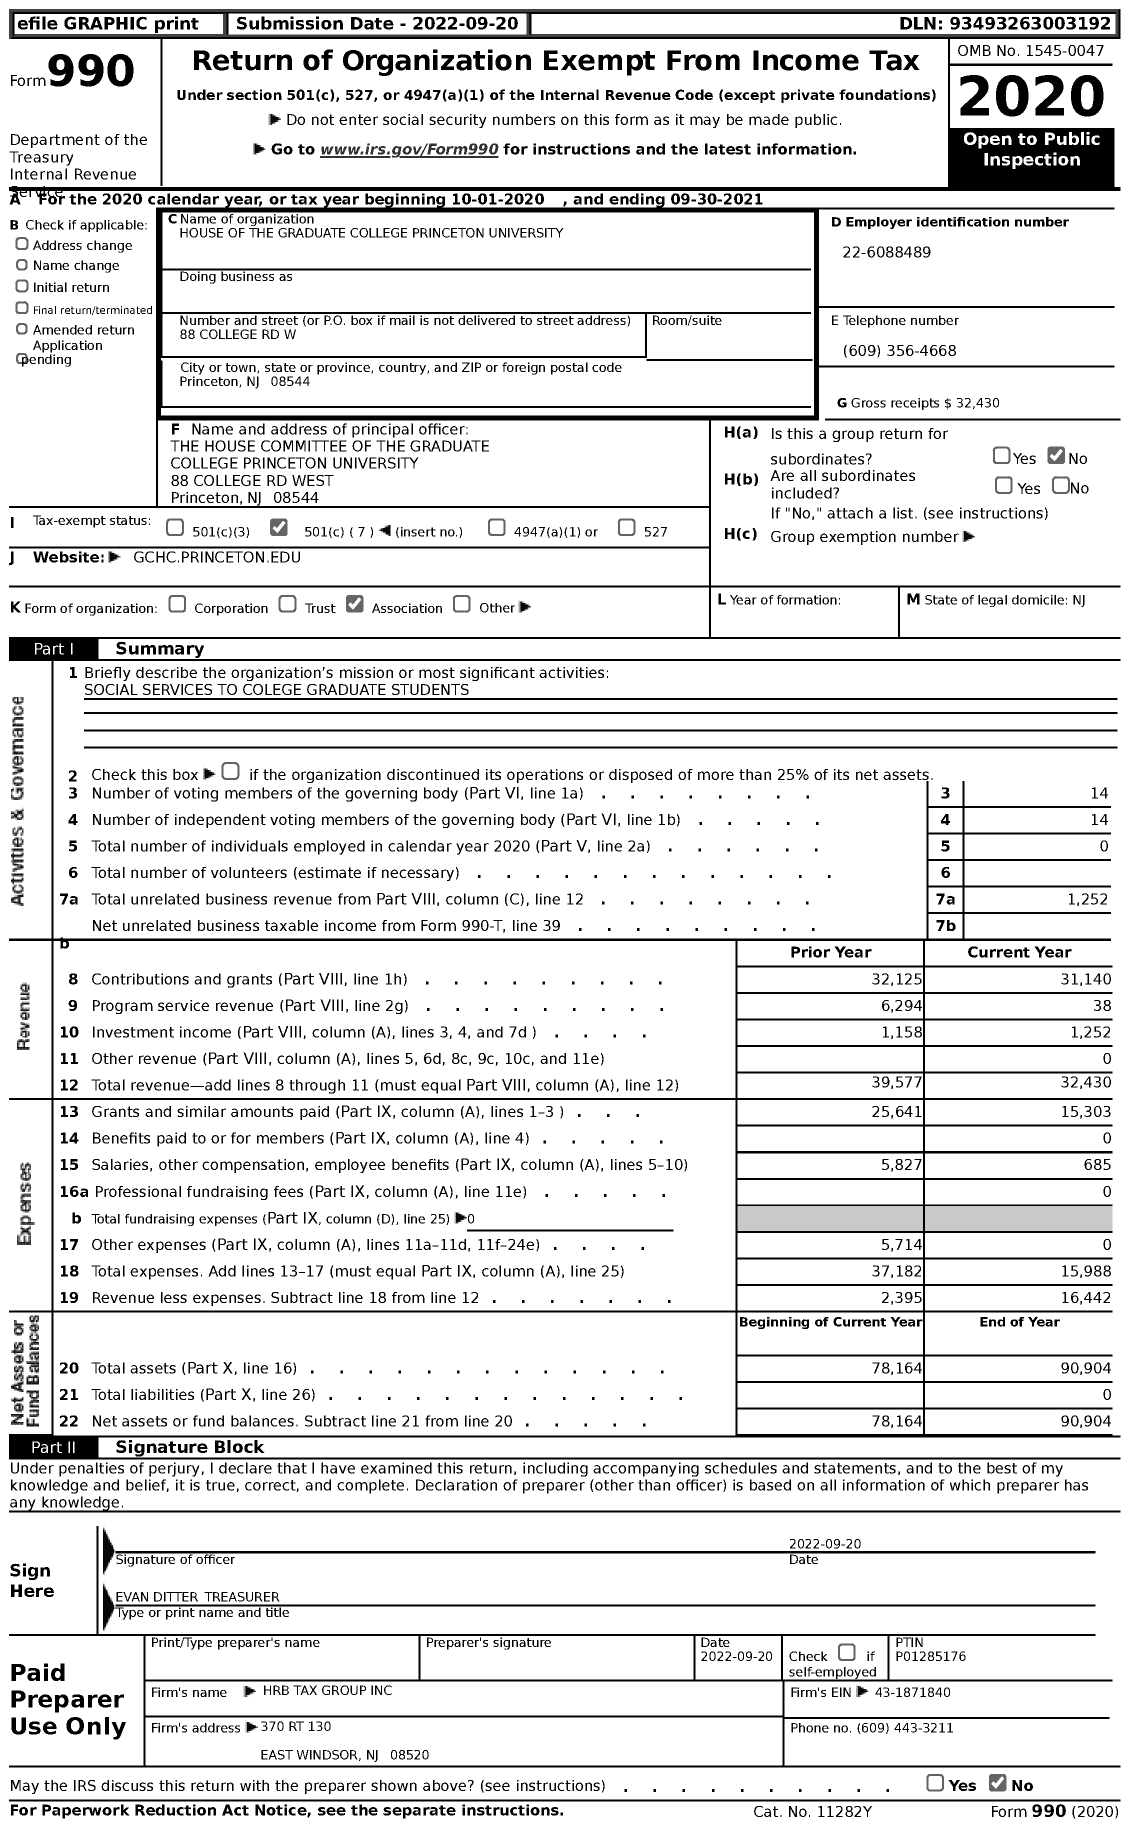 Image of first page of 2020 Form 990 for The House Committee of the Graduate College Princeton University